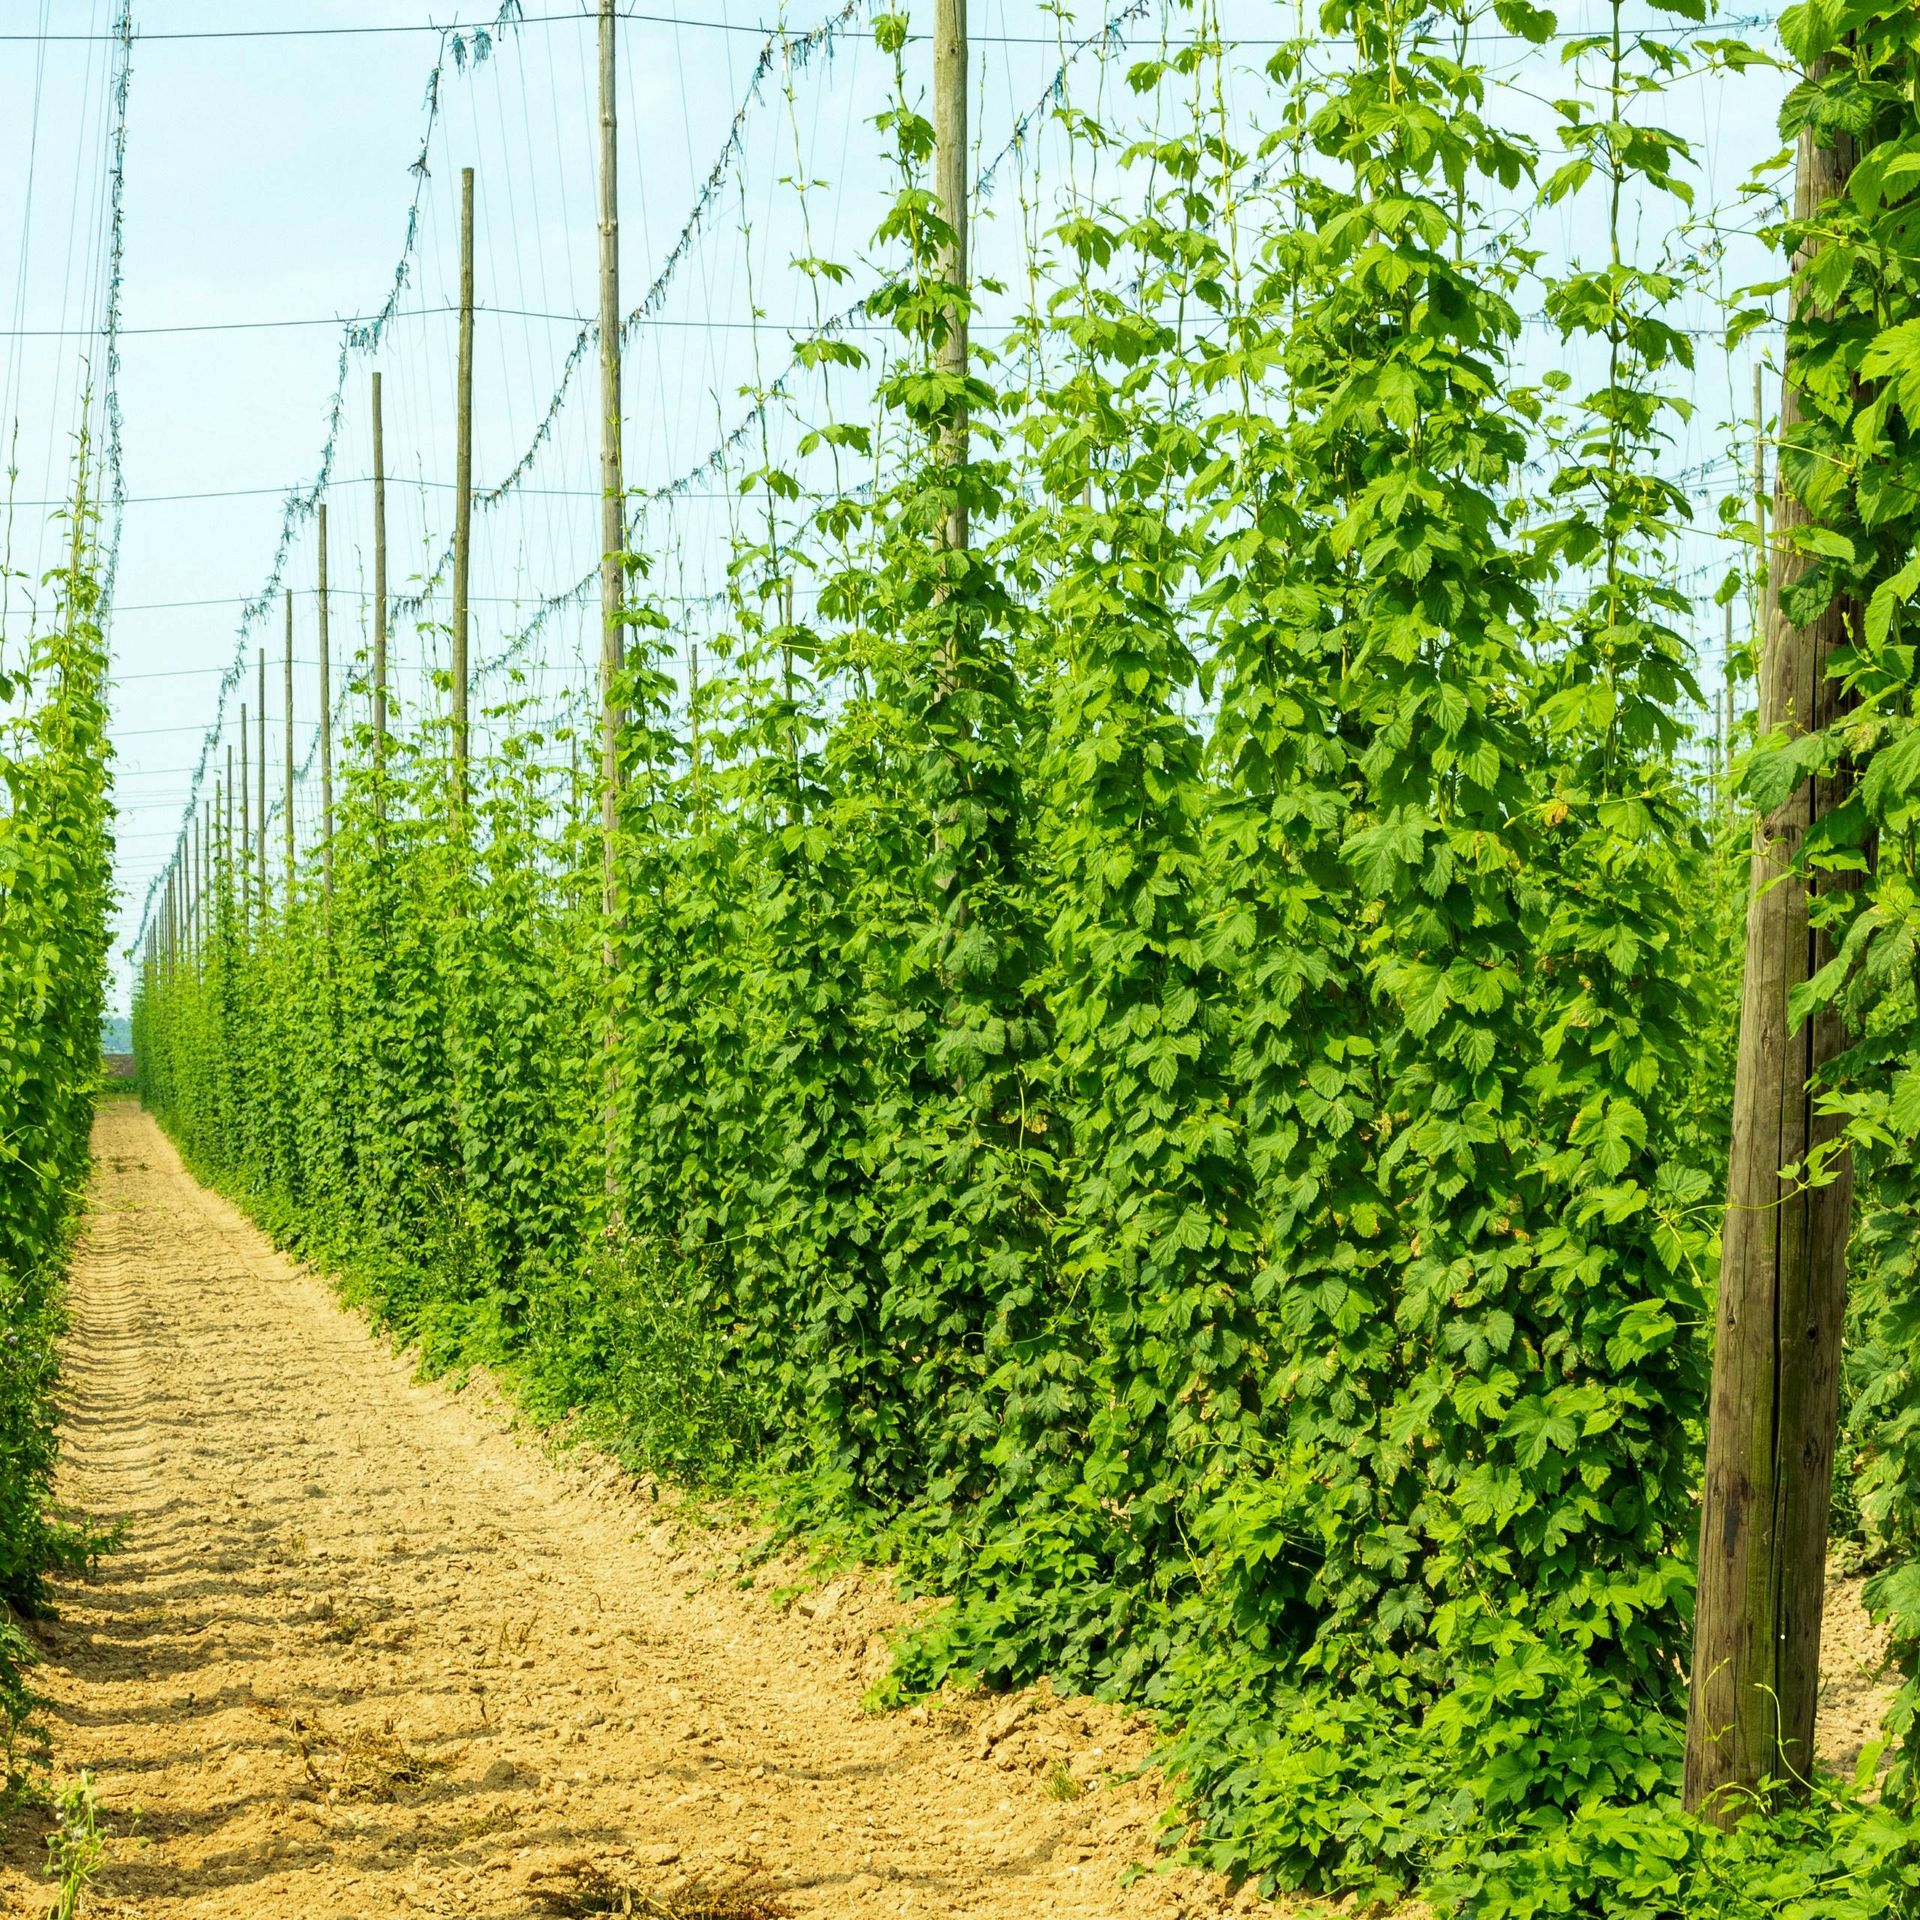 Image of a hop field